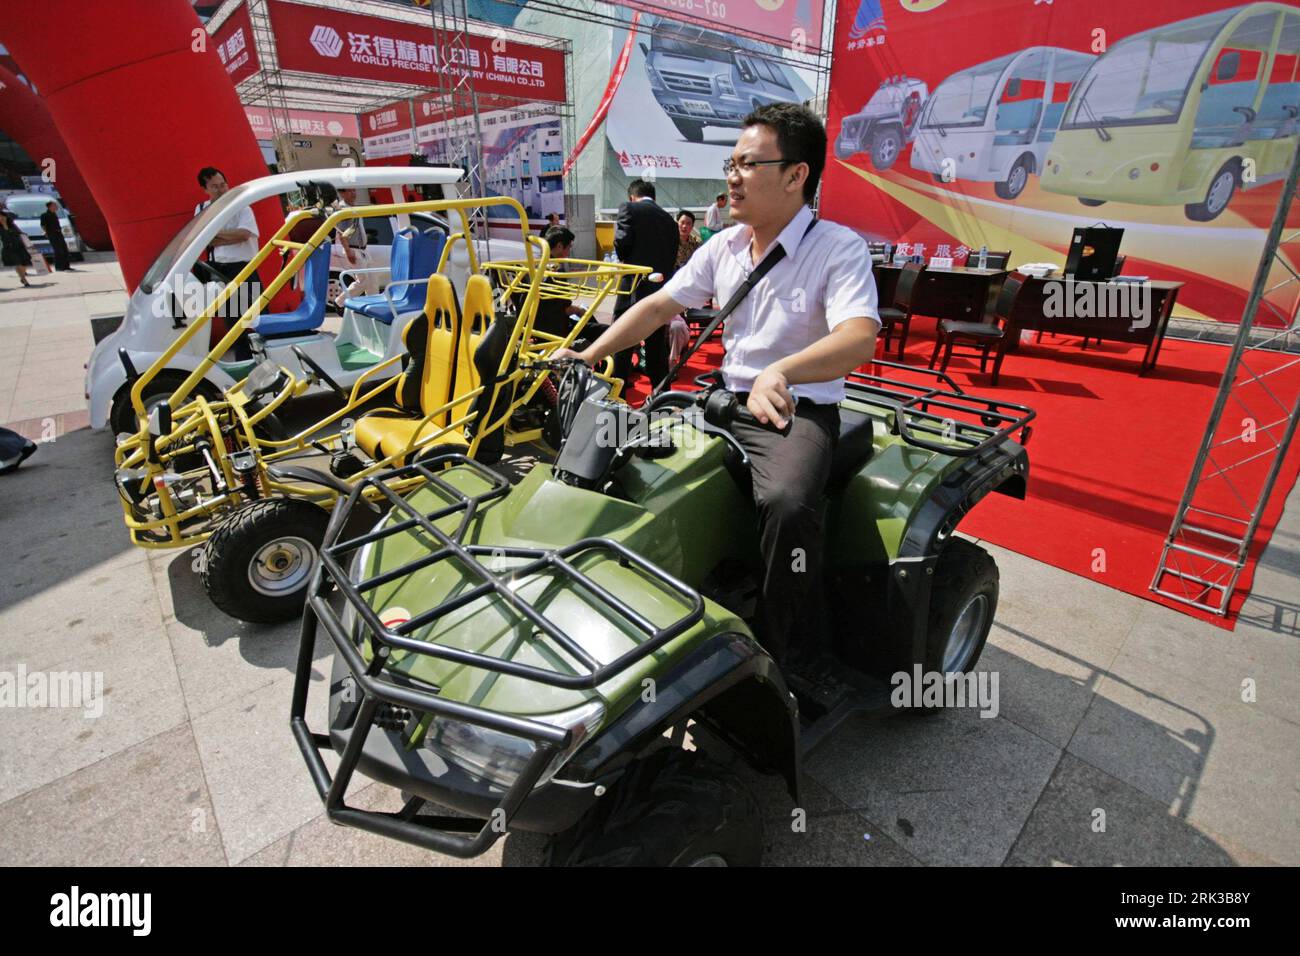 Bildnummer: 53411441  Datum: 23.09.2009  Copyright: imago/Xinhua WUHAN,  (Xinhua) A visitor tries an electric beach bike at the 10th China International Machinery and Electronic Products Exposition in Wuhan, capital of central China s Hubei Province, . Opened Wednesday at the Wuhan International Convention and Exhibition Center, the four-day exposition attracted some 500 enterprises from more than 40 countries and regions. (Xinhua/Li Li) (wqq) (2)CHINA-WUHAN-MACHINERY AND ELECTRONIC PRODUCTS EXPOSITION (CN) PUBLICATIONxNOTxINxCHN Messe kbdig xsk 2009 quer o0 Wirtschaft    Bildnummer 53411441 D Stock Photo